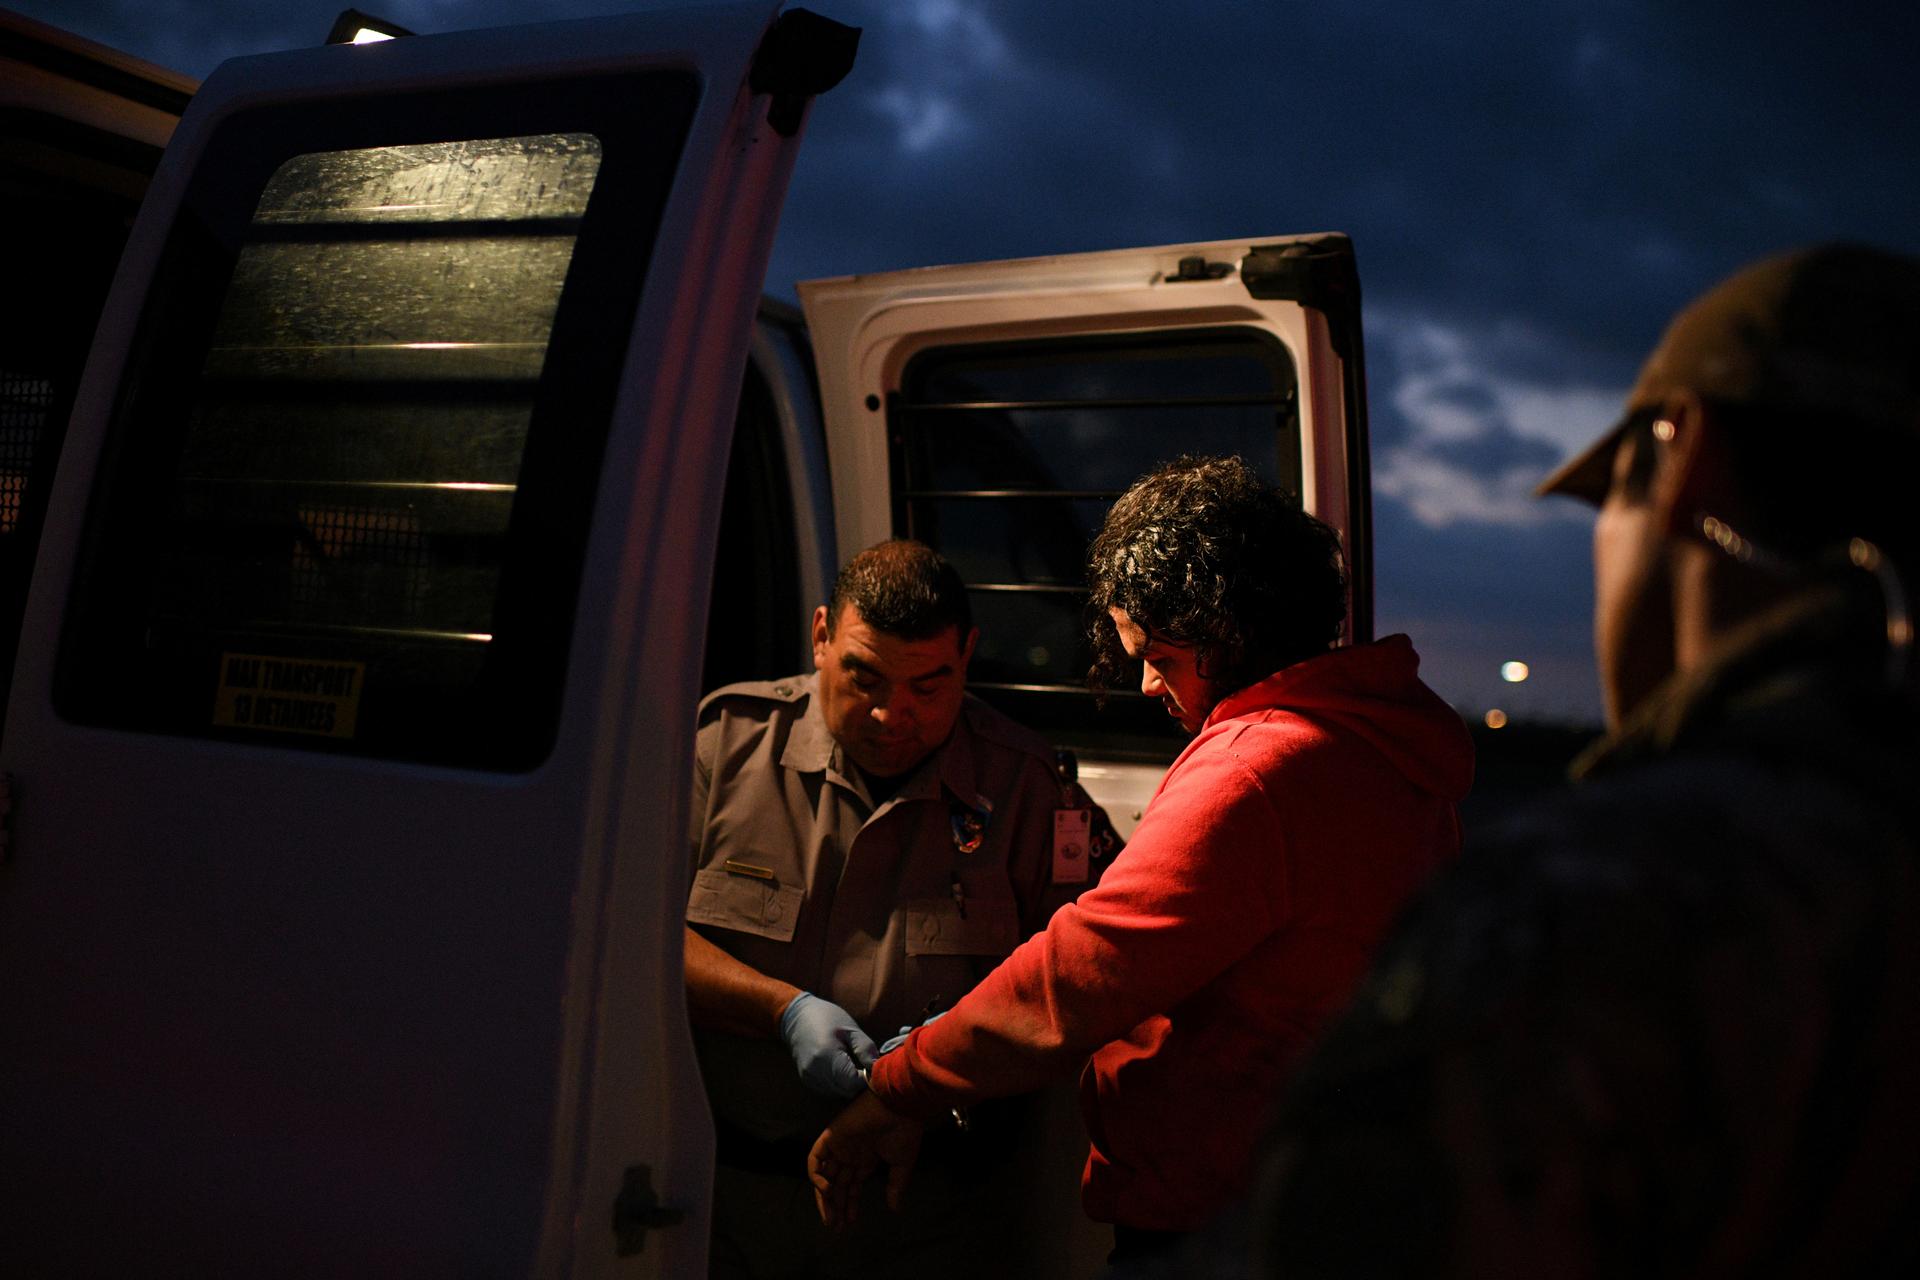 Undocumented migrants are escorted into a transport van after being apprehended by US Border Patrol agents following an illegal crossing of the Rio Grande in Mission, Texas, on Oct. 8, 2019.